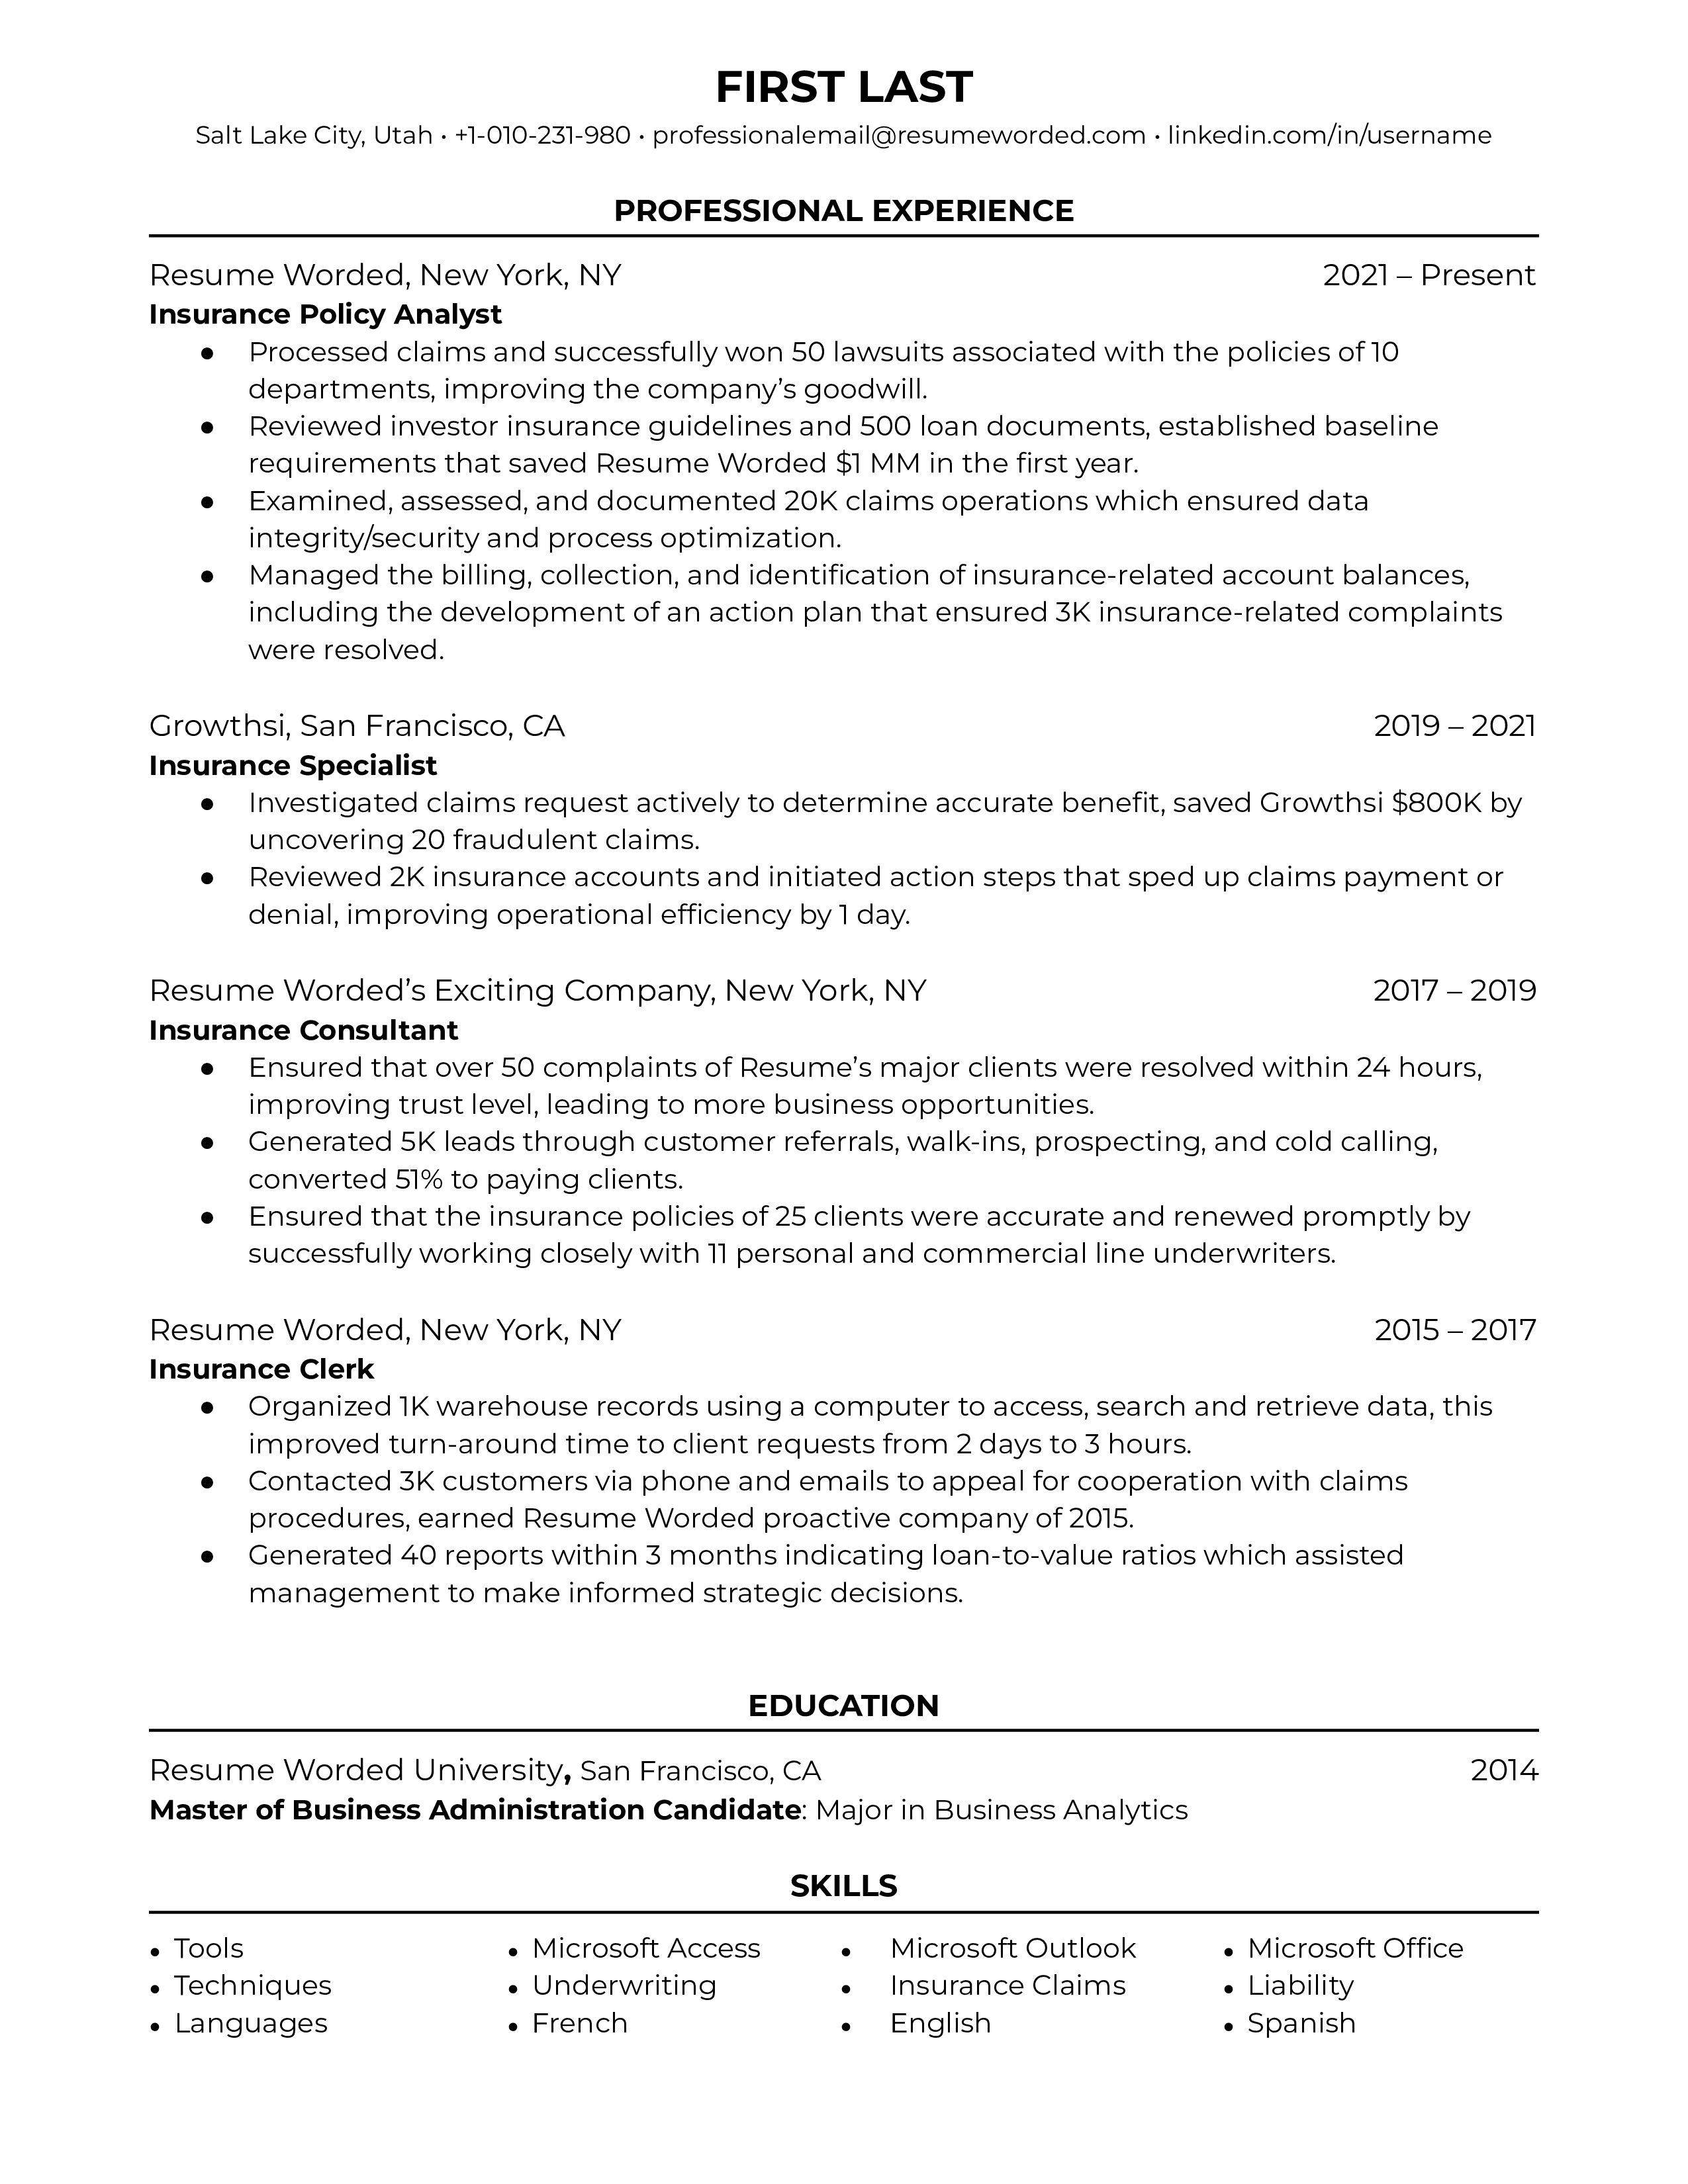 An Insurance Policy Analyst's CV showcasing their expertise in policy knowledge and the use of technology in analysis.